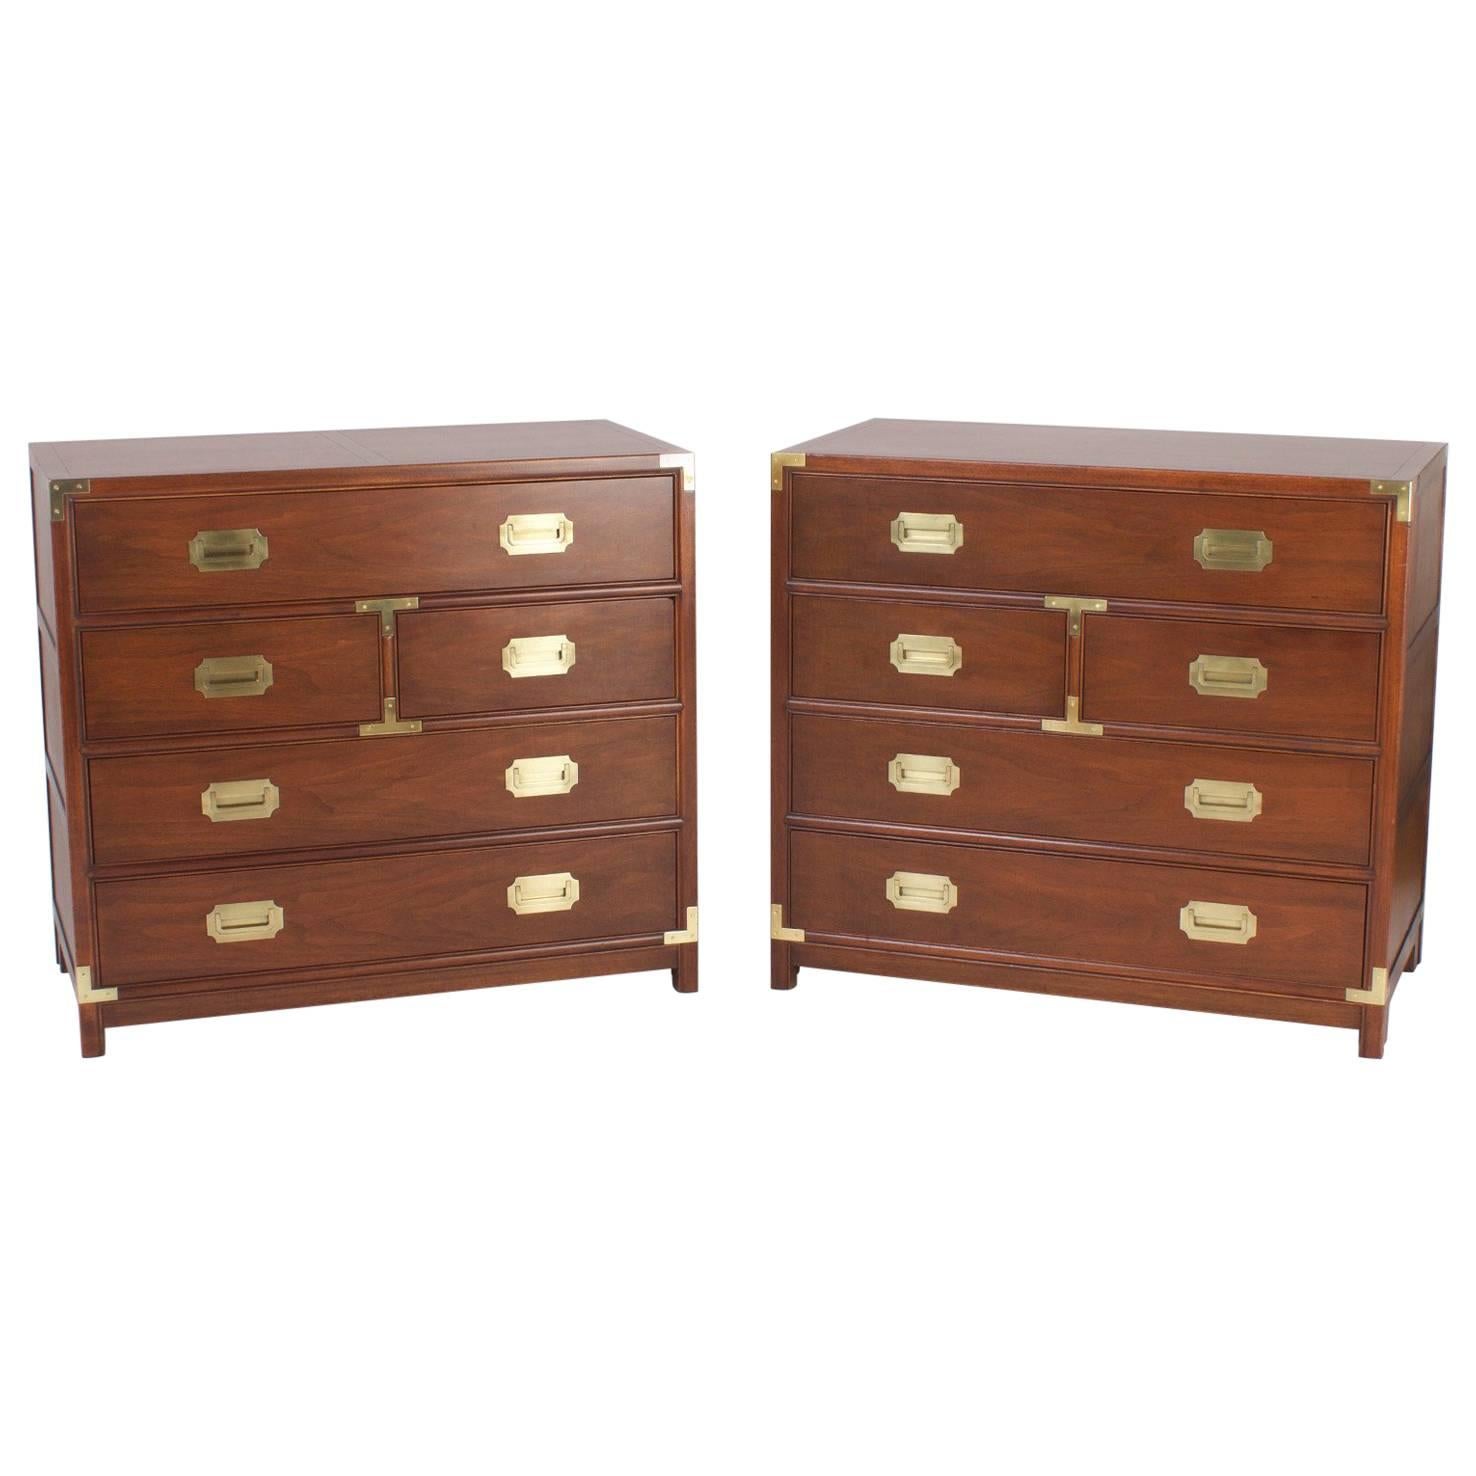 Handsome Pair of Campaign Style Mahogany Chests